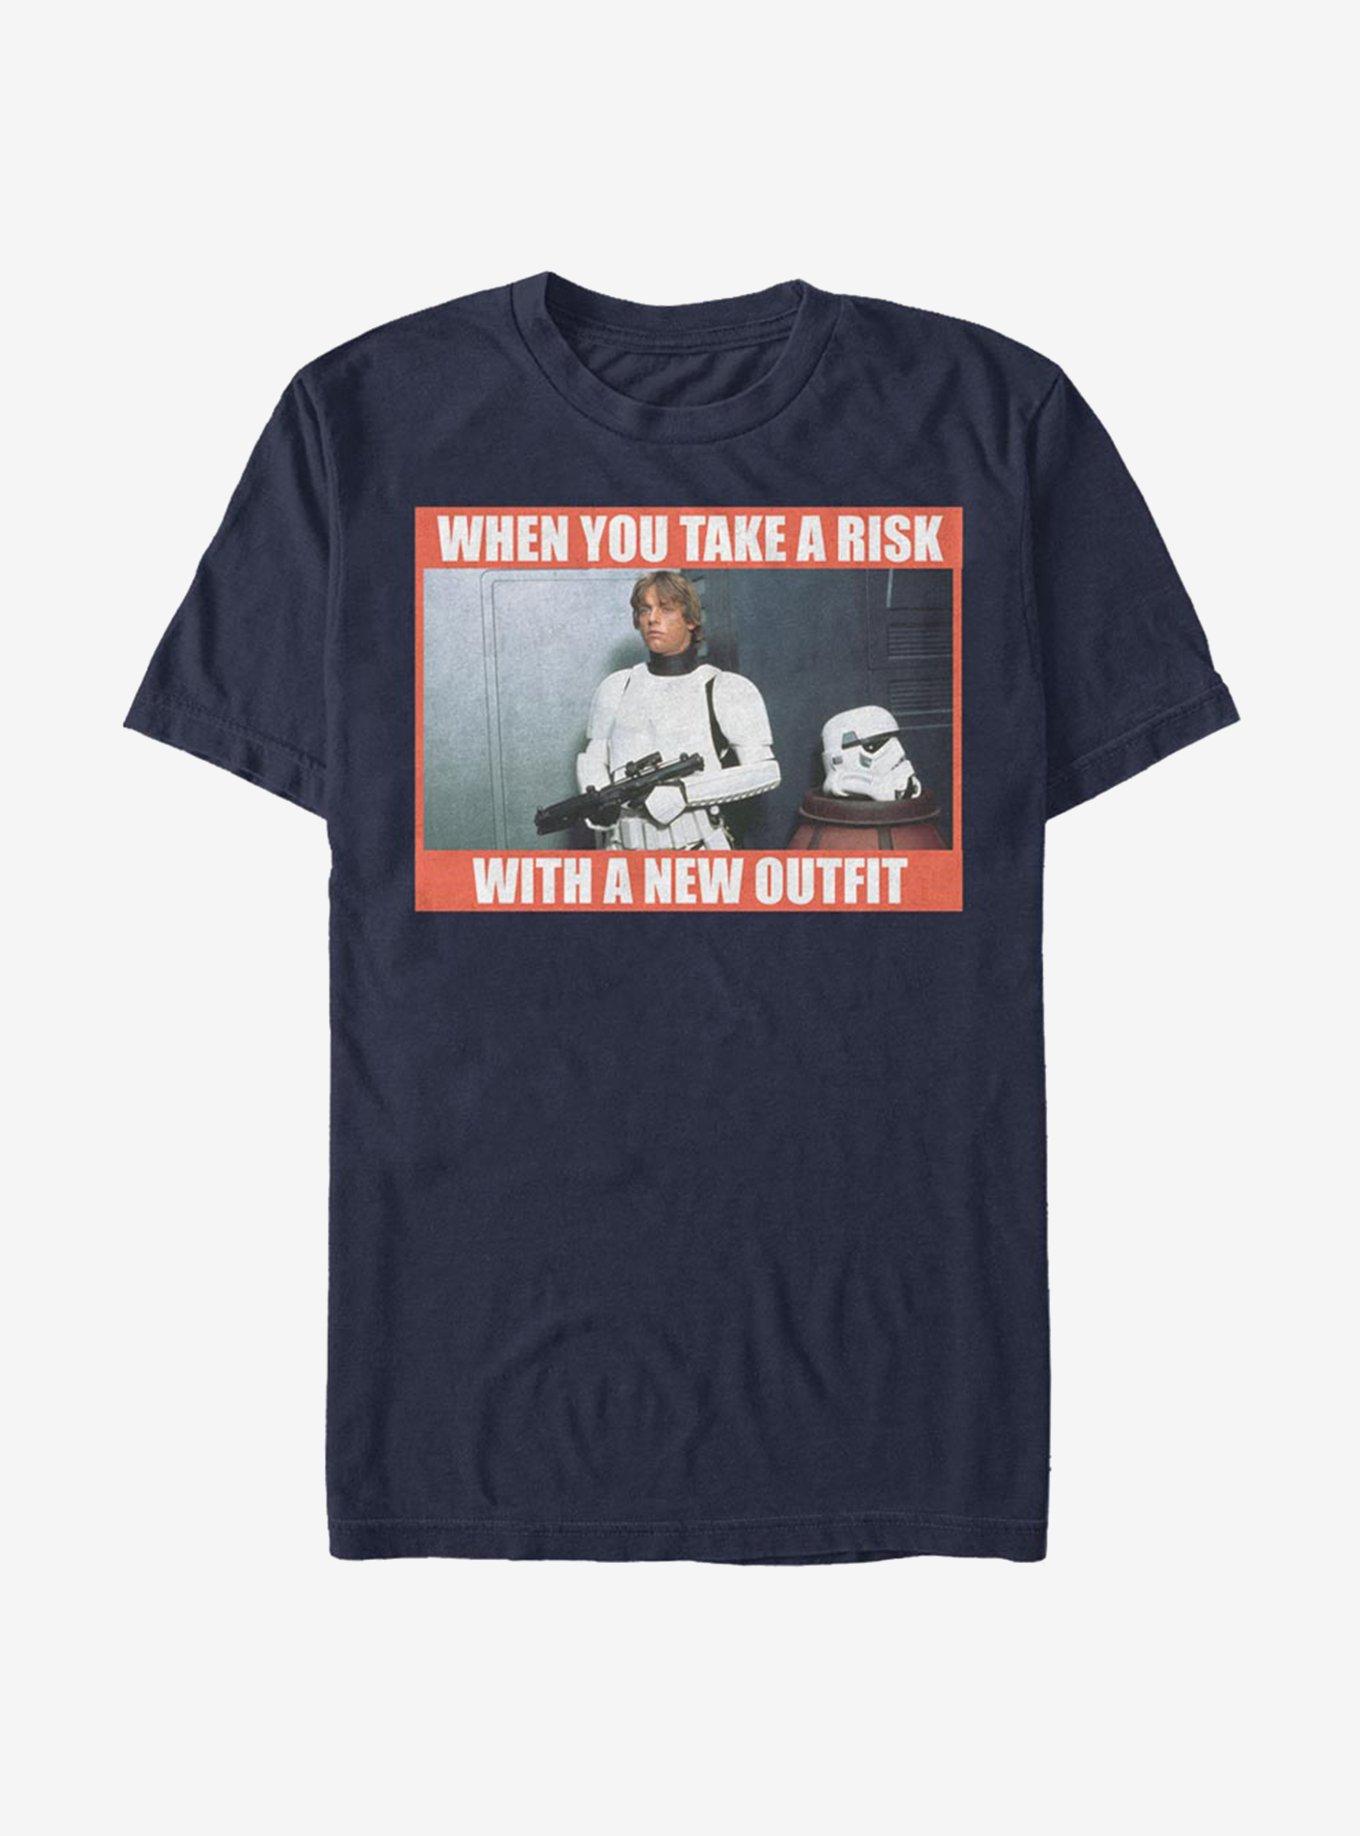 Star Wars New Outfit T-Shirt, NAVY, hi-res